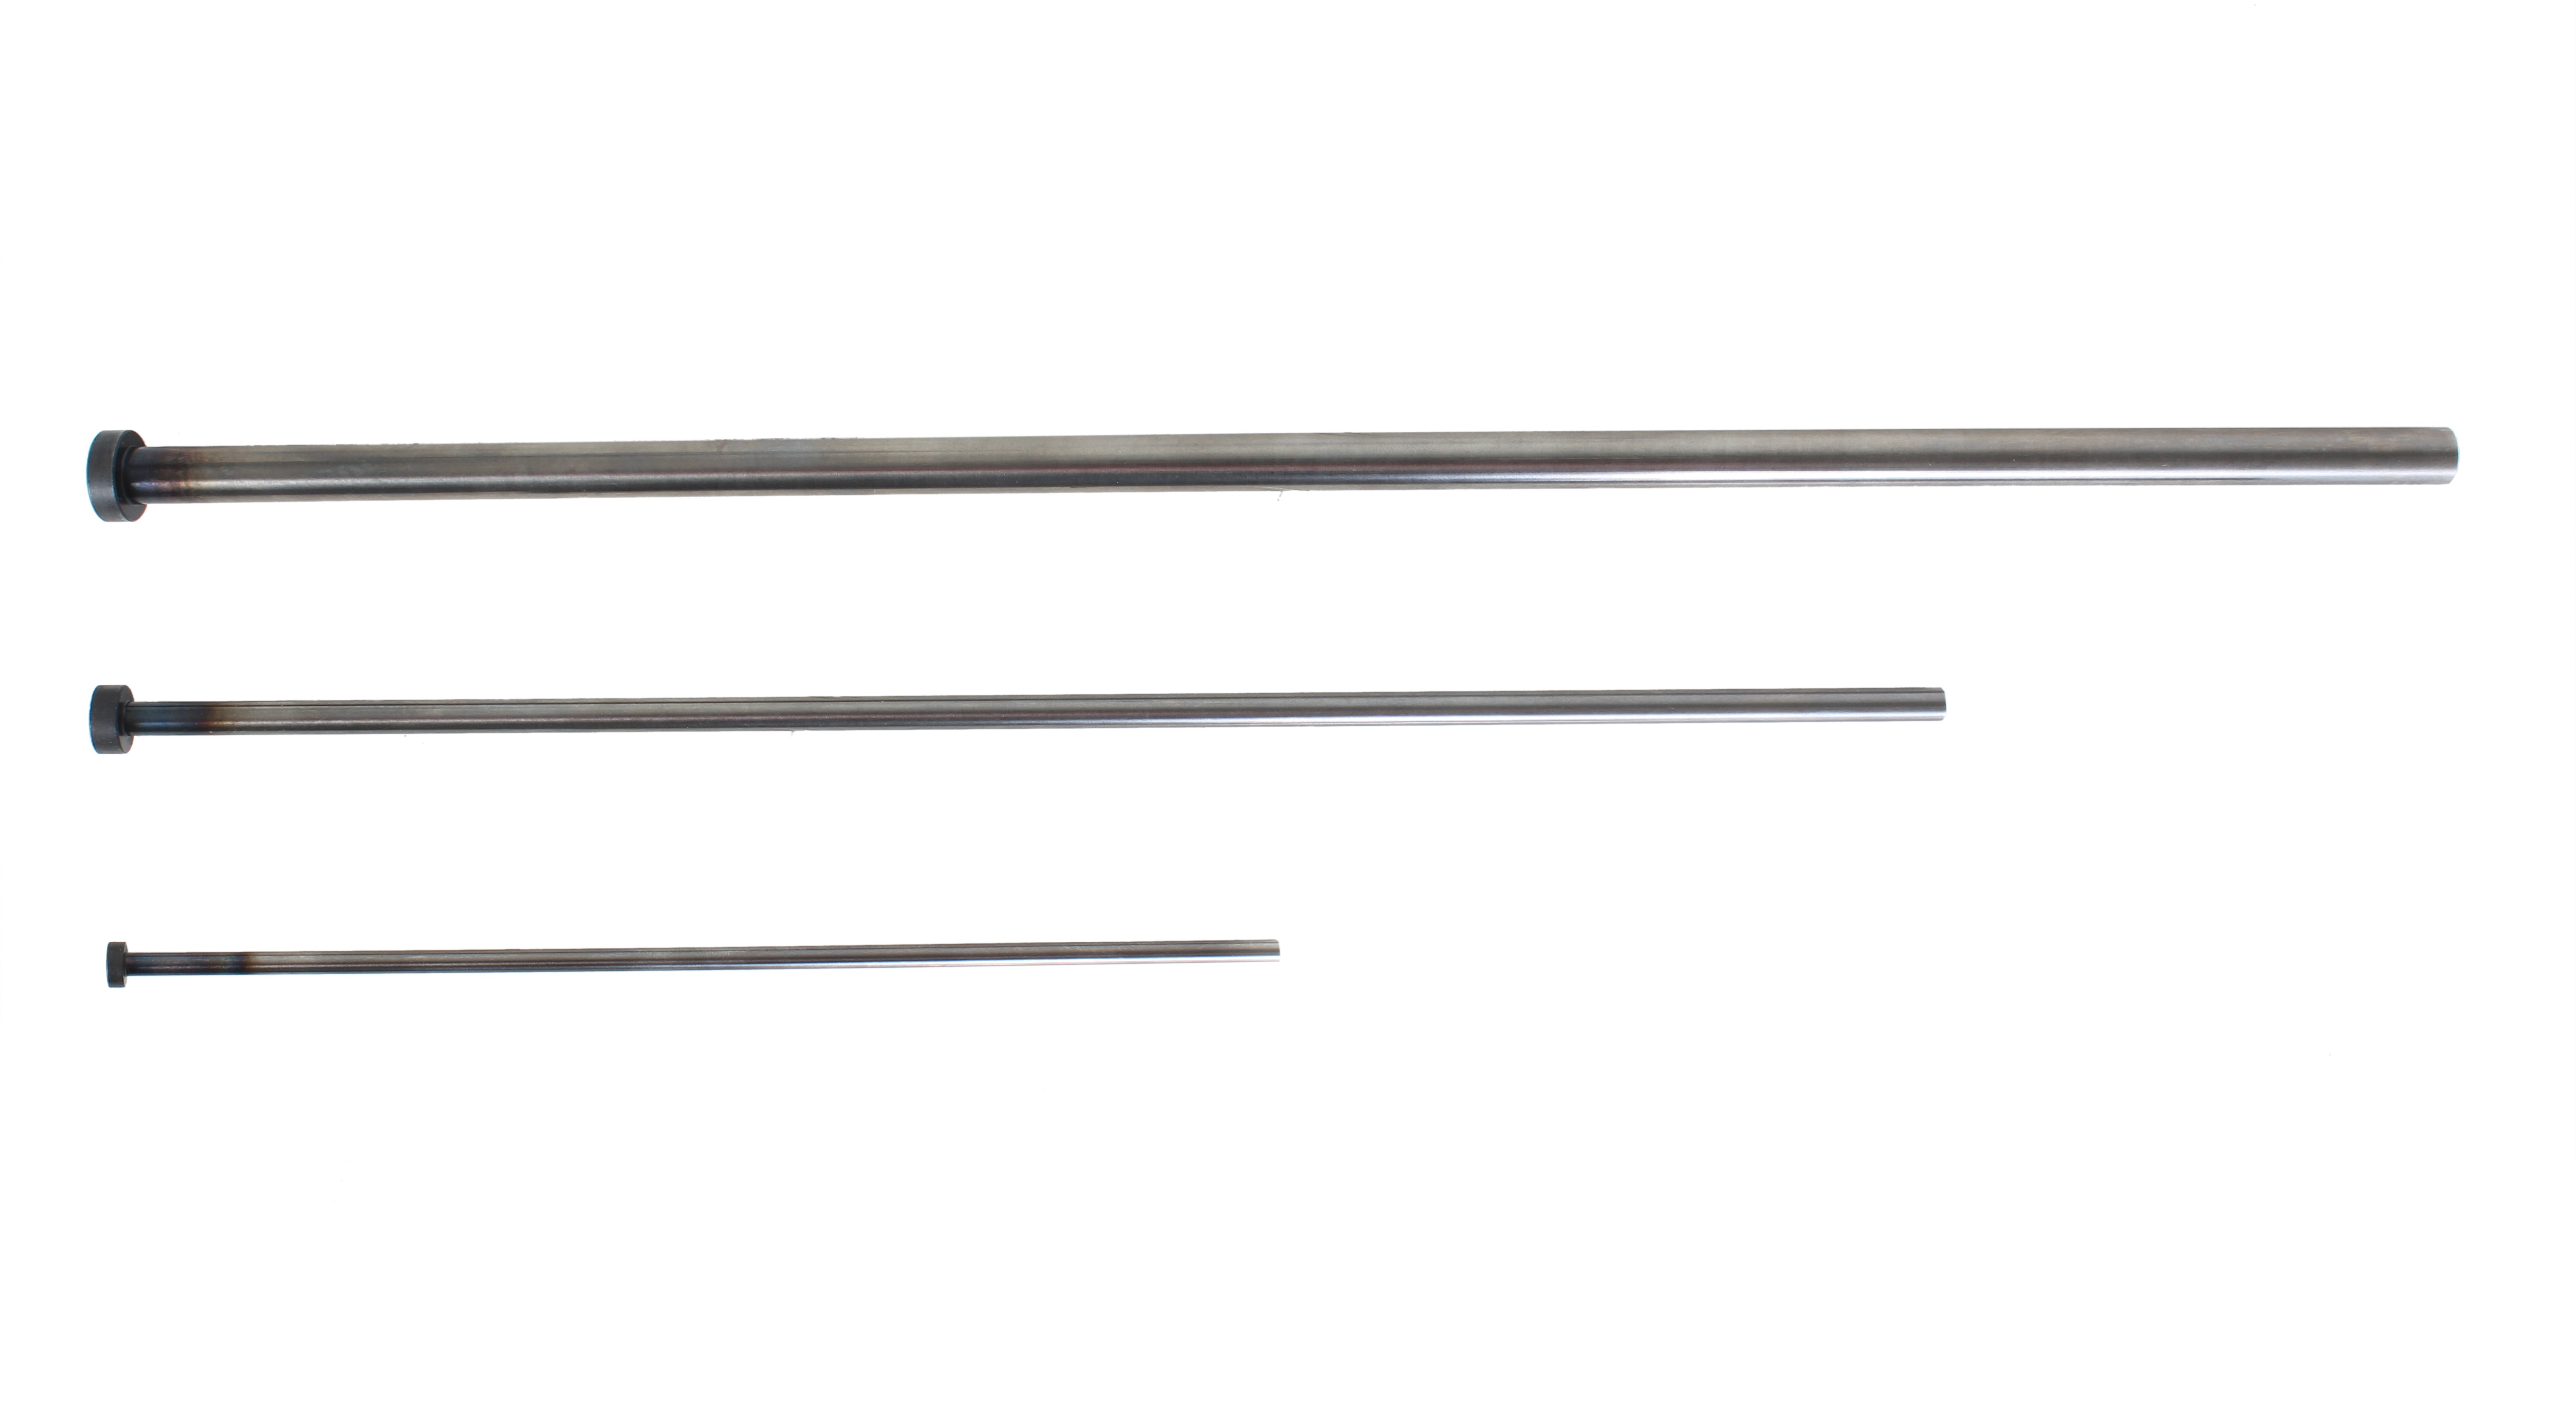 STRAIGHT EJECTOR PINS -DIN Type/SKD61 equivalent+Nitrided/Standard- (D-EPN8-400) 